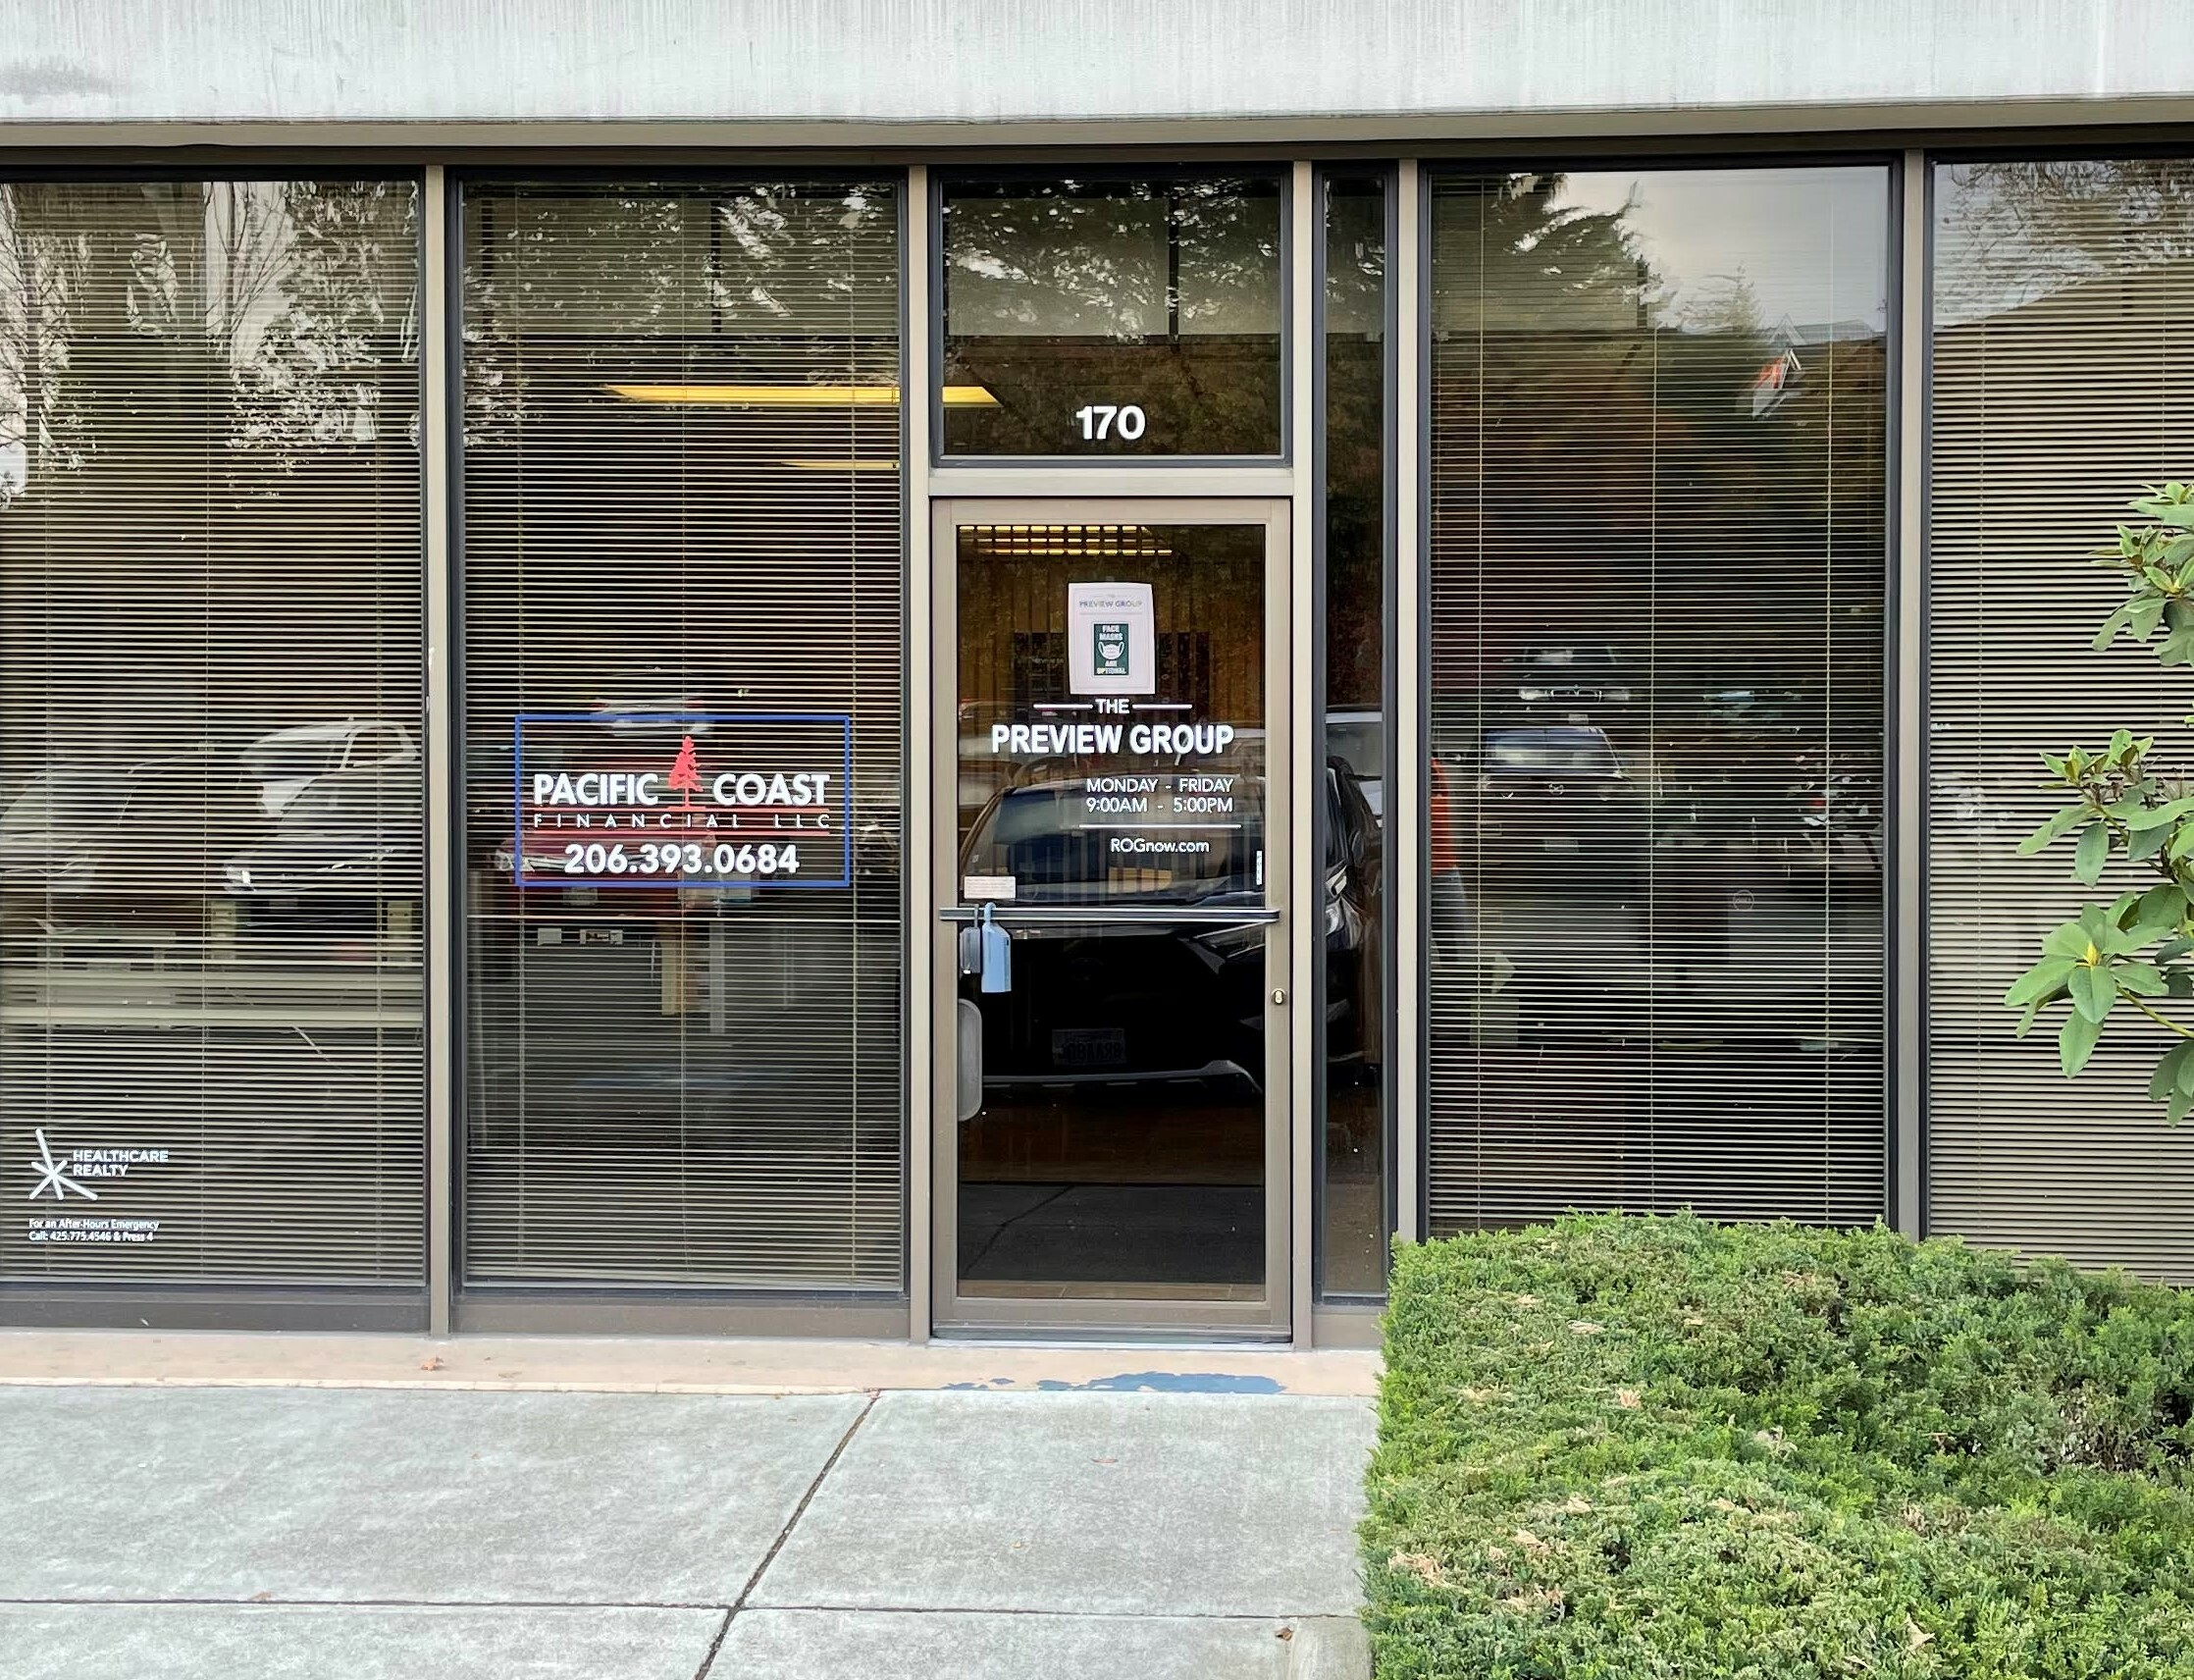 Seattle Office,Seattle,The Preview Group